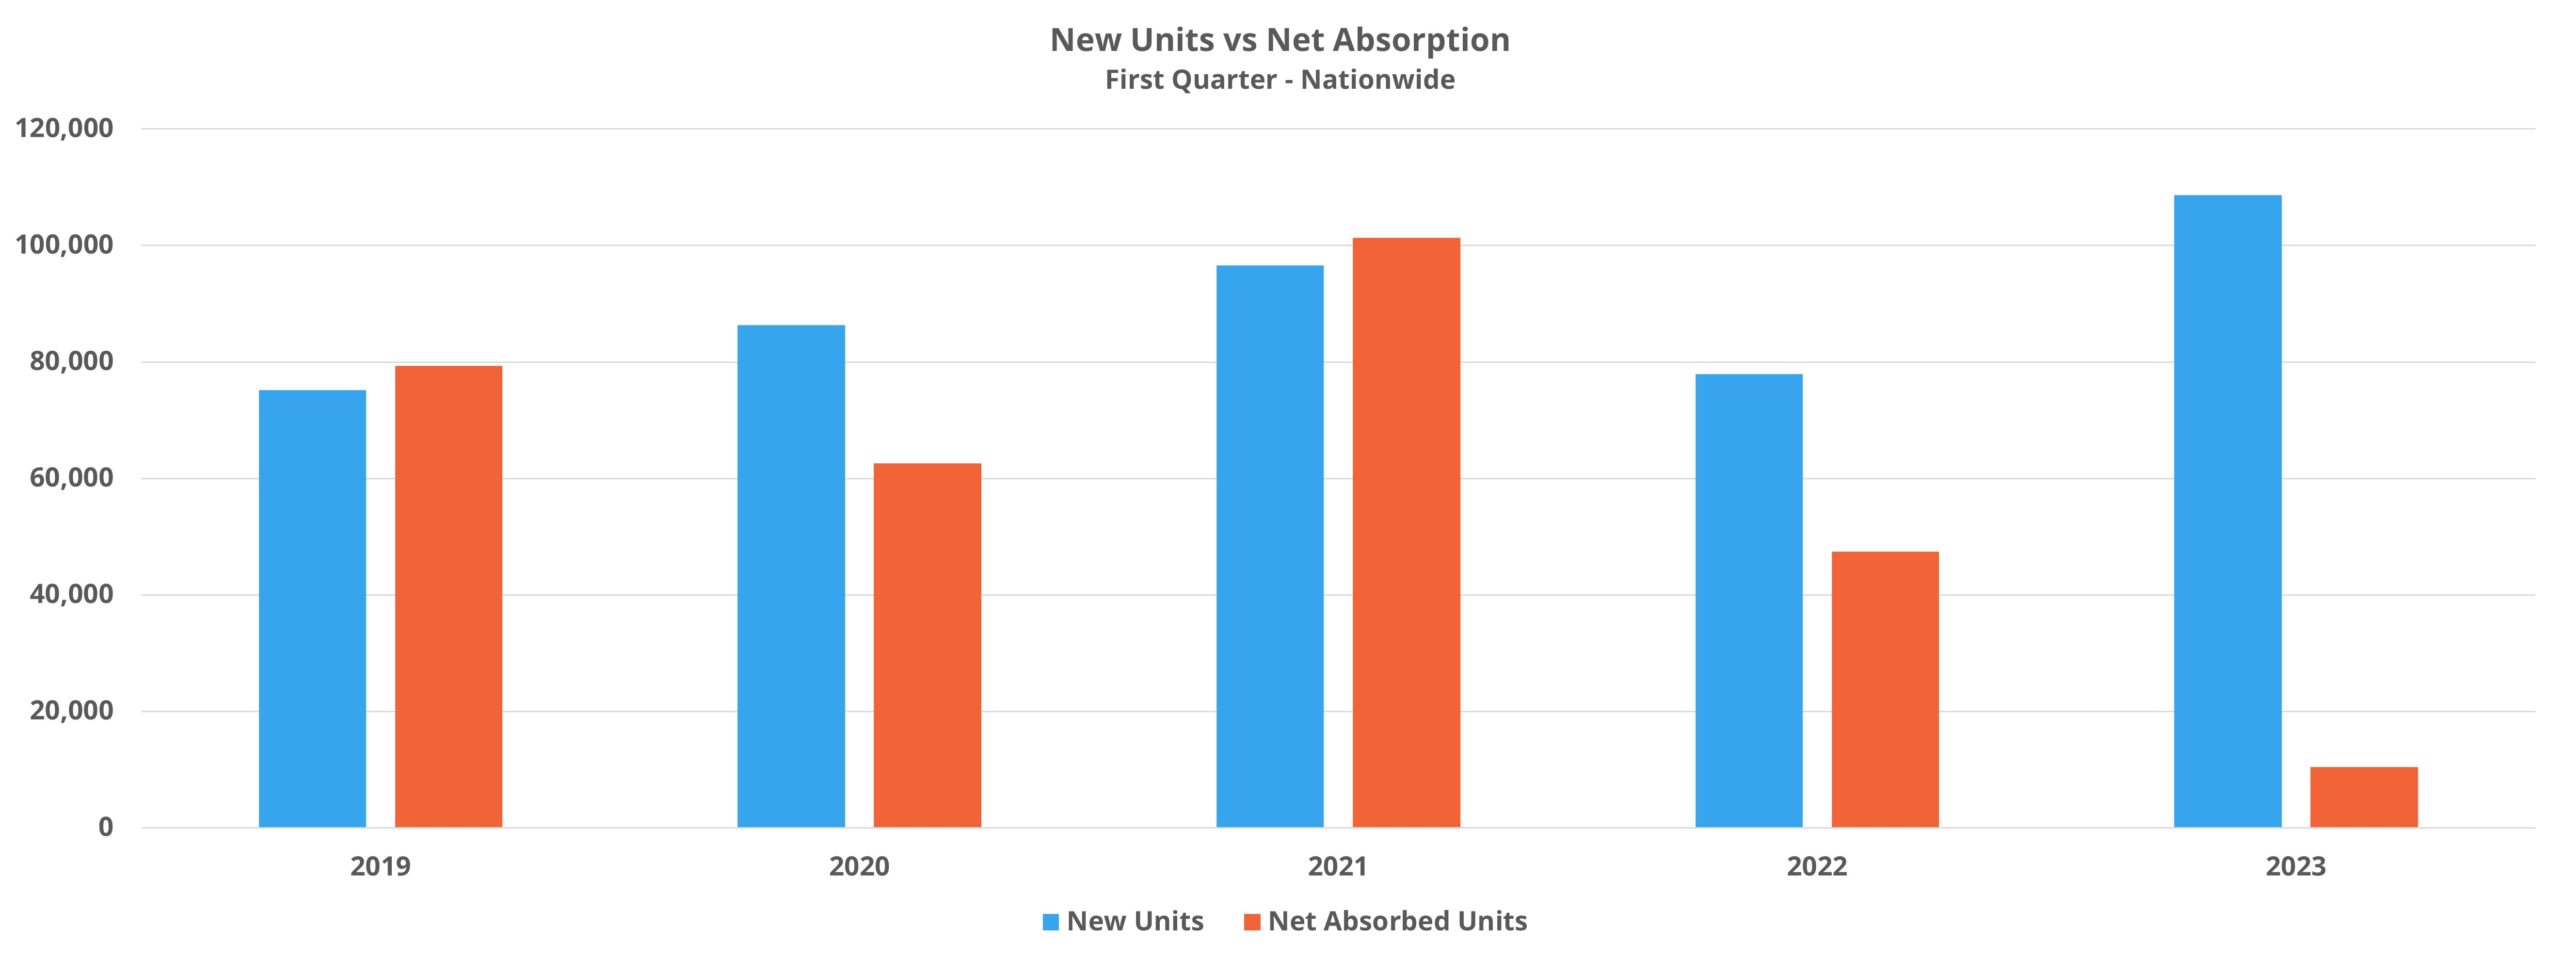 New Units vs Net Absorbed Units